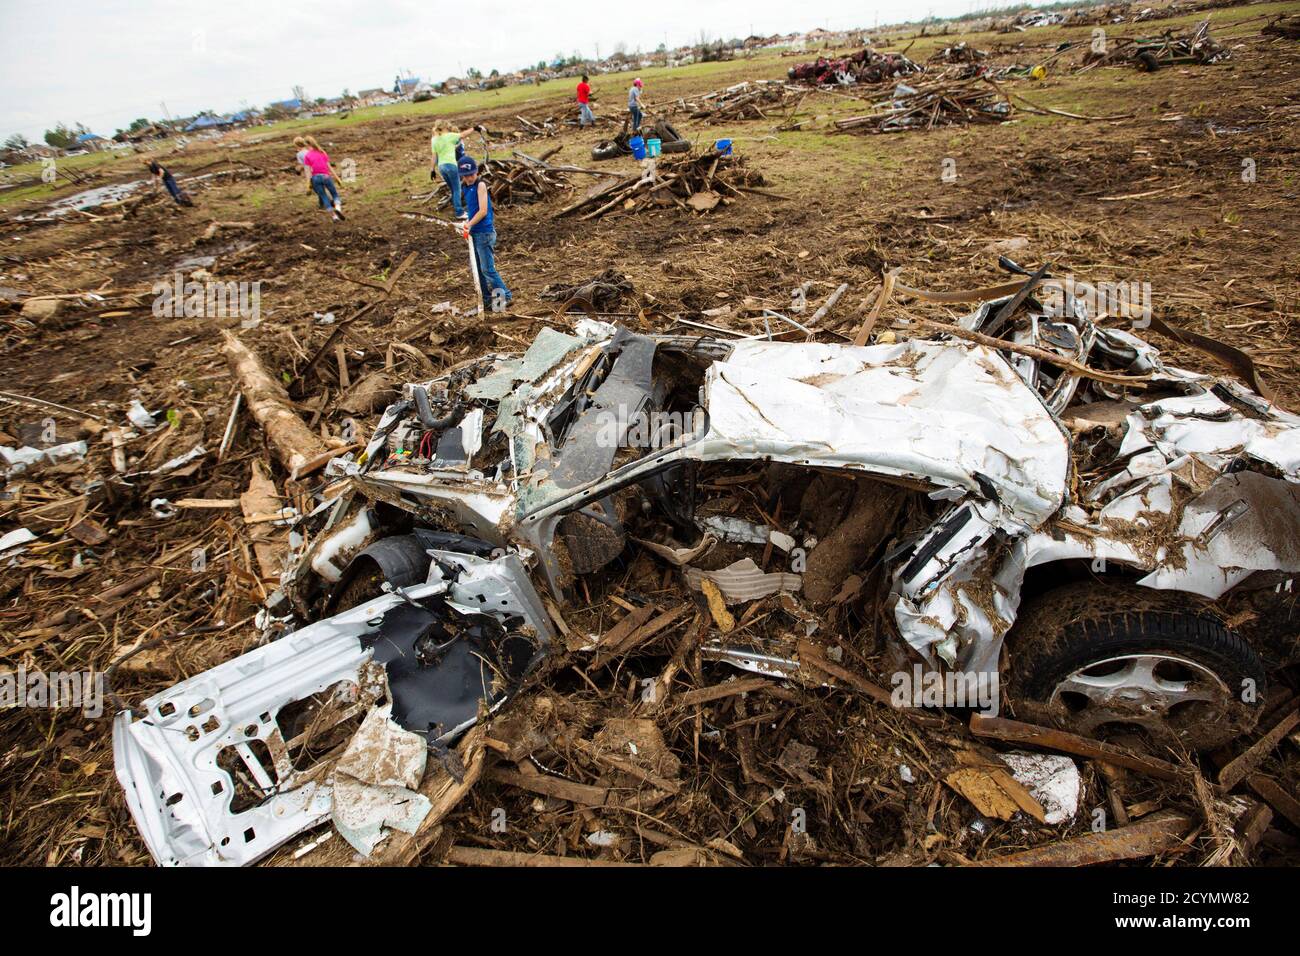 a-wind-damaged-car-rests-near-volunteers-working-to-remove-debris-from-a-field-near-the-orr-family-farm-in-oklahoma-city-oklahoma-may-25-2013-the-tornado-was-the-strongest-in-the-united-states-in-nearly-two-years-and-cut-a-path-of-destruction-17-miles-27-km-long-and-13-2-km-miles-wide-storm-experts-said-it-was-remarkable-that-only-24-people-were-killed-as-tornadoes-of-this-strength-can-blow-away-a-well-constructed-brick-or-wood-house-reuterslucas-jackson-united-states-tags-disaster-environment-2CYMW82.jpg